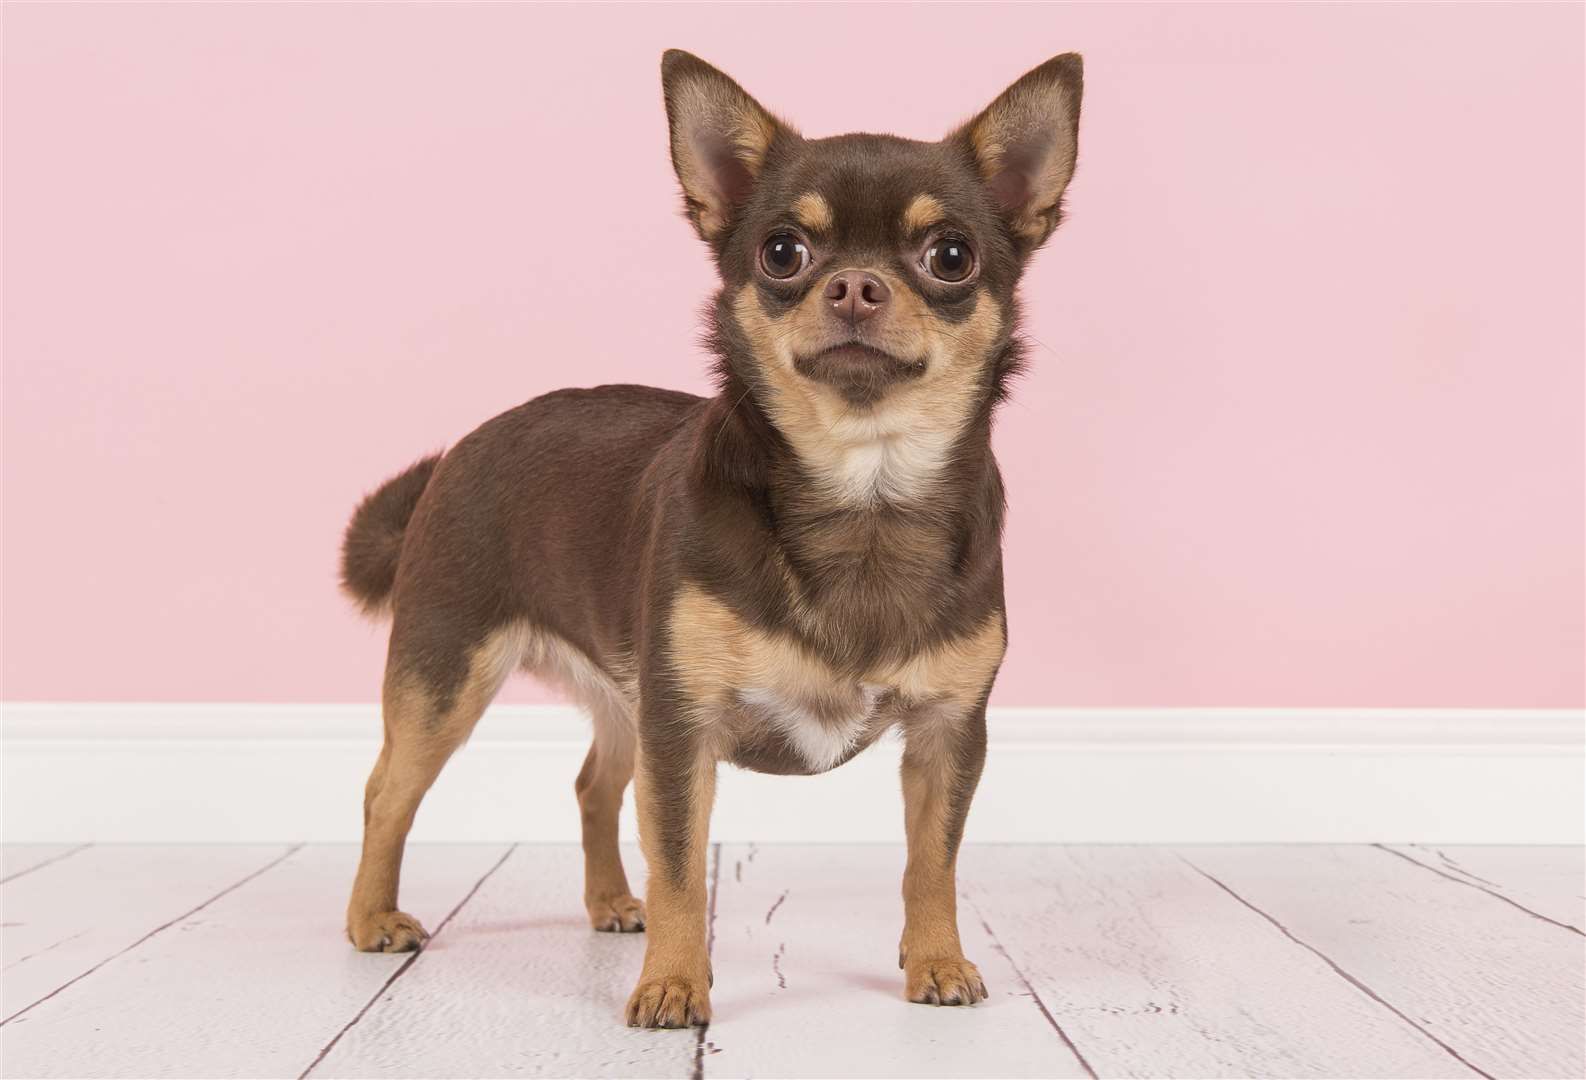 The chihuahua made it into the top 10. Image: iStock.